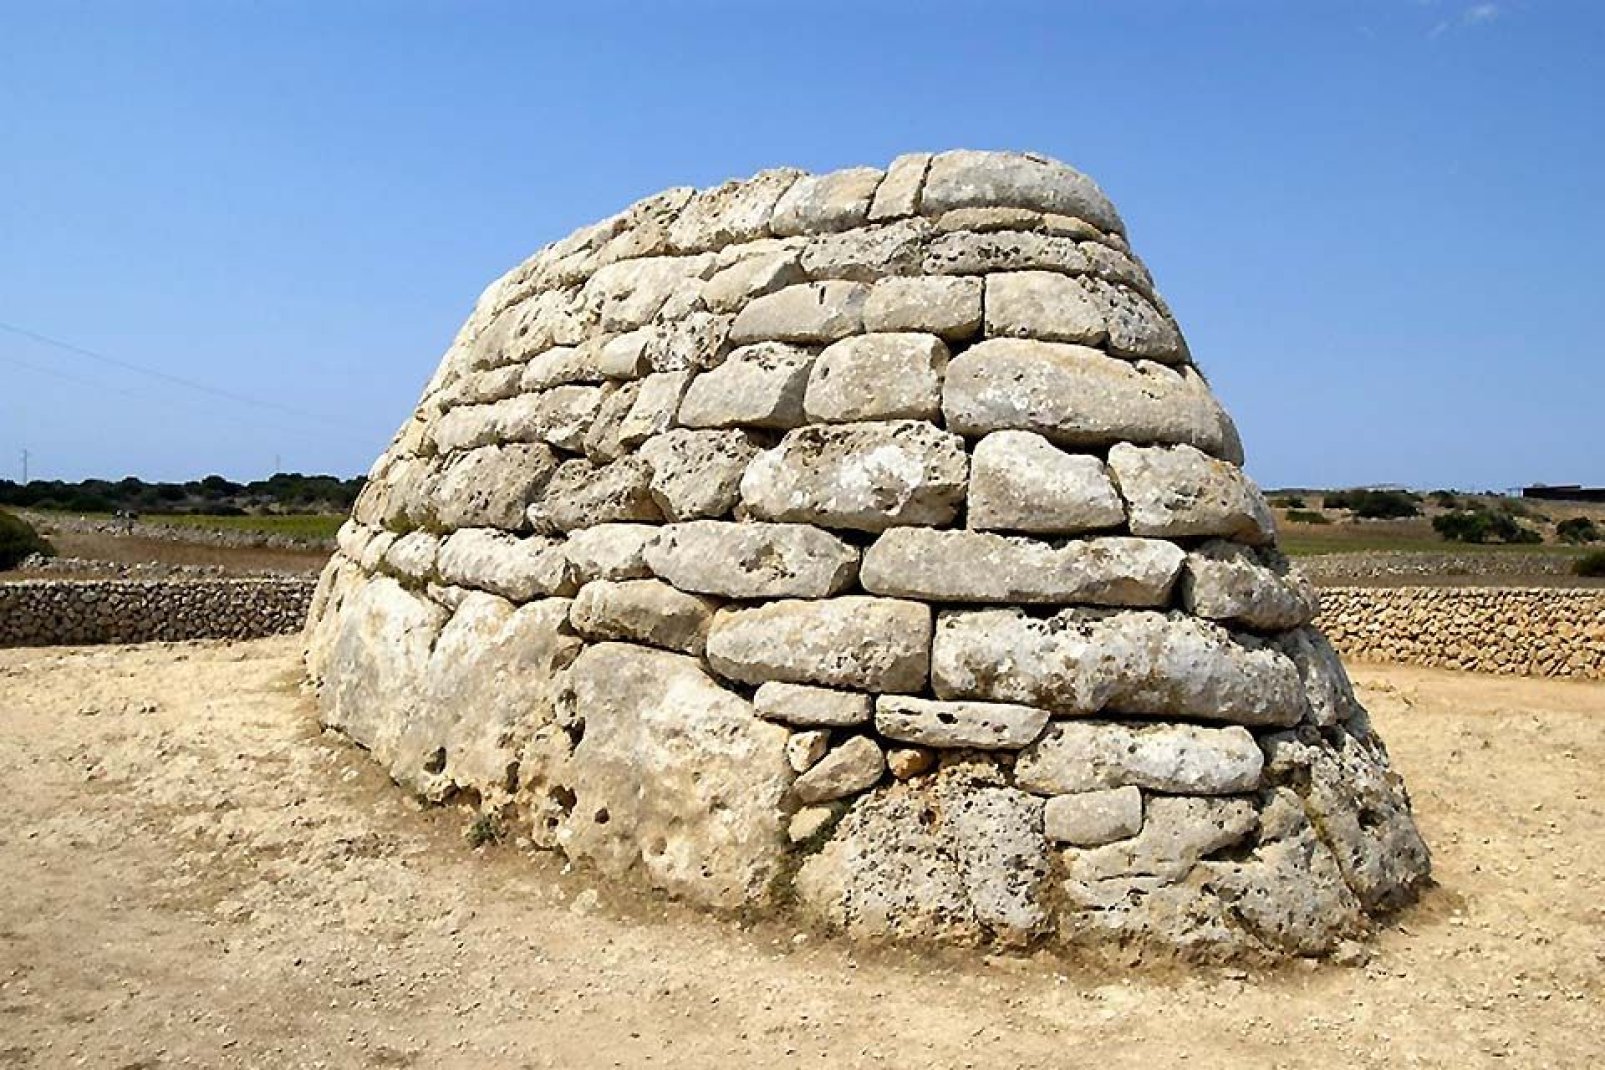 These stone constructions were built to serve as funeral monuments.